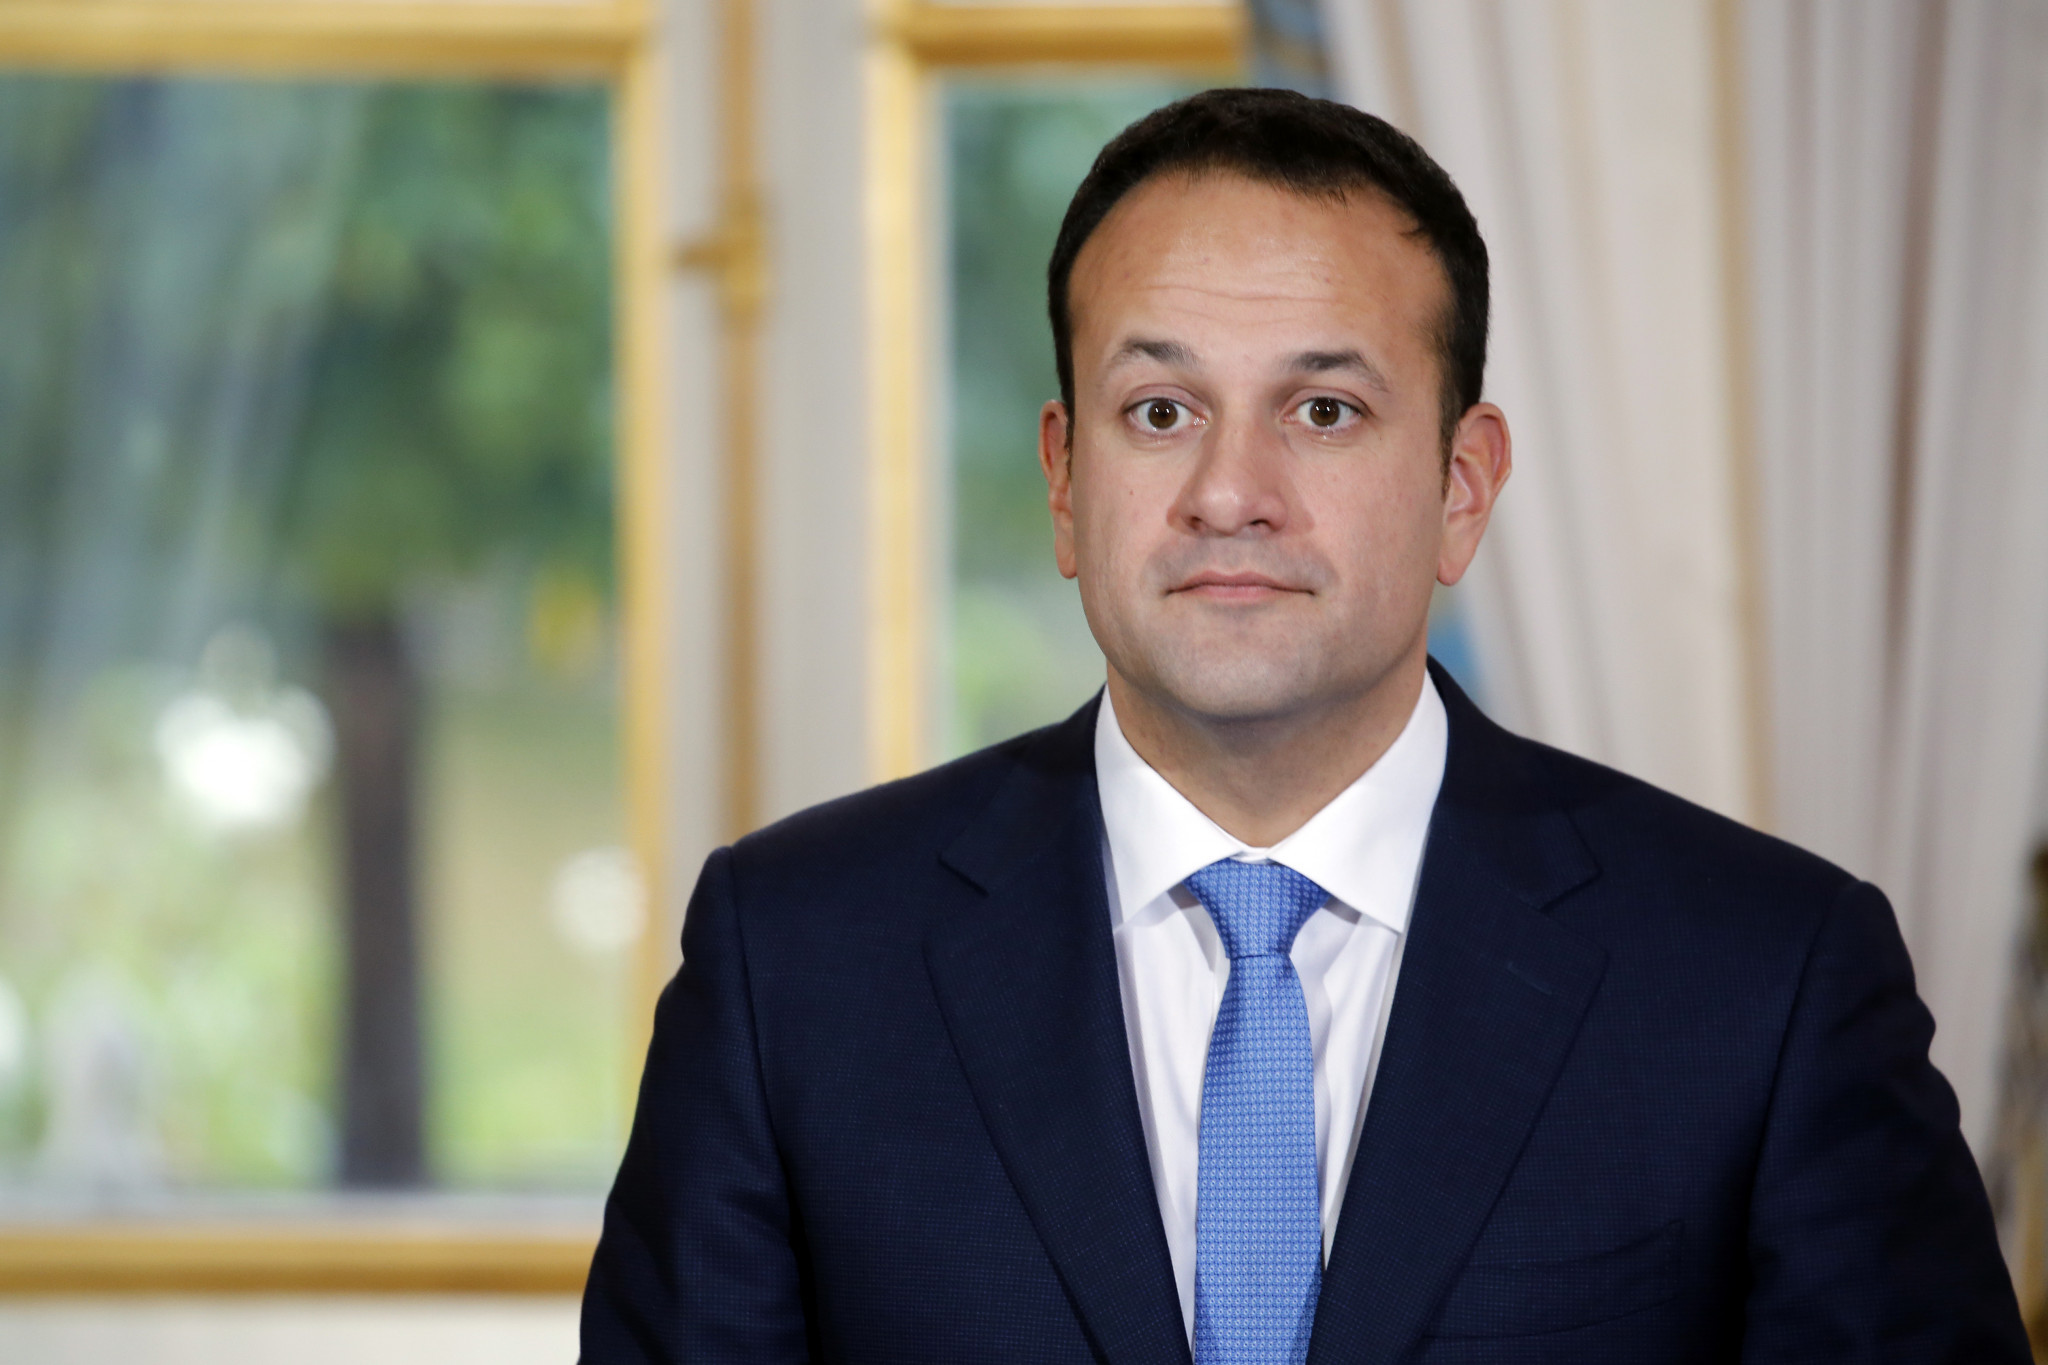 Ireland's Taoiseach, Leo Varadkar, says that the country's bid for the 2023 Rugby World Cup is "still alive" ©Getty Images